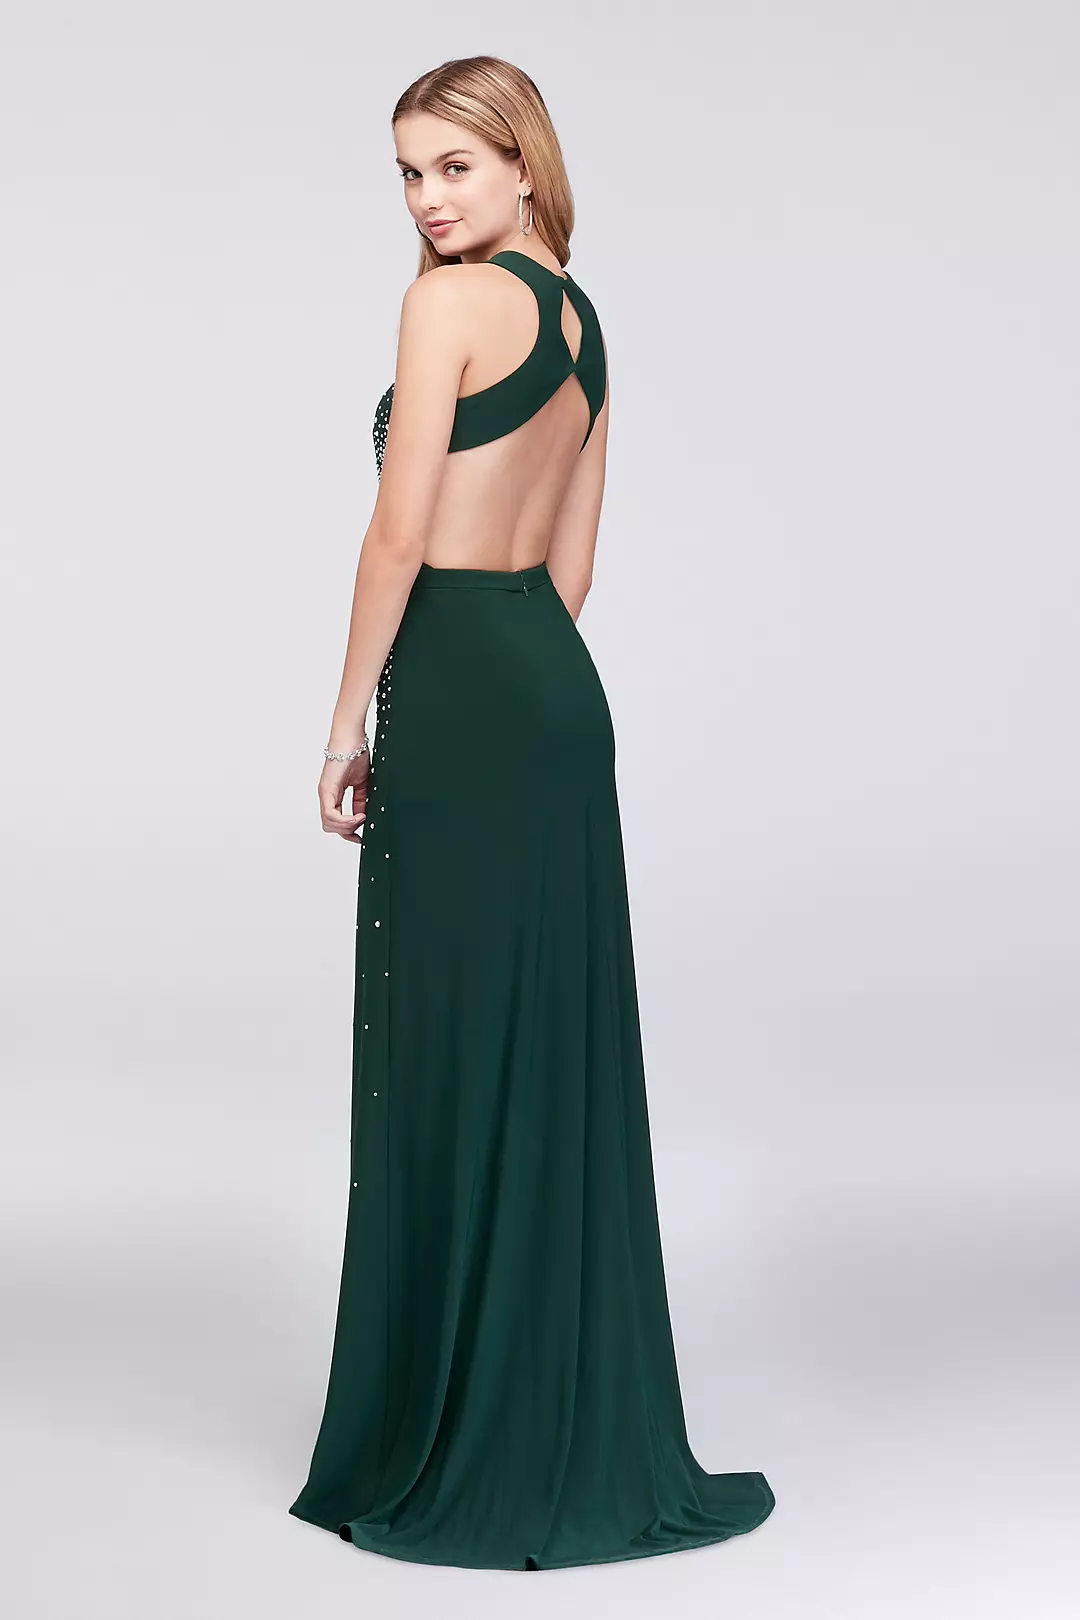 Jeweled Jersey Halter Gown with Cutout Waistline Image 2